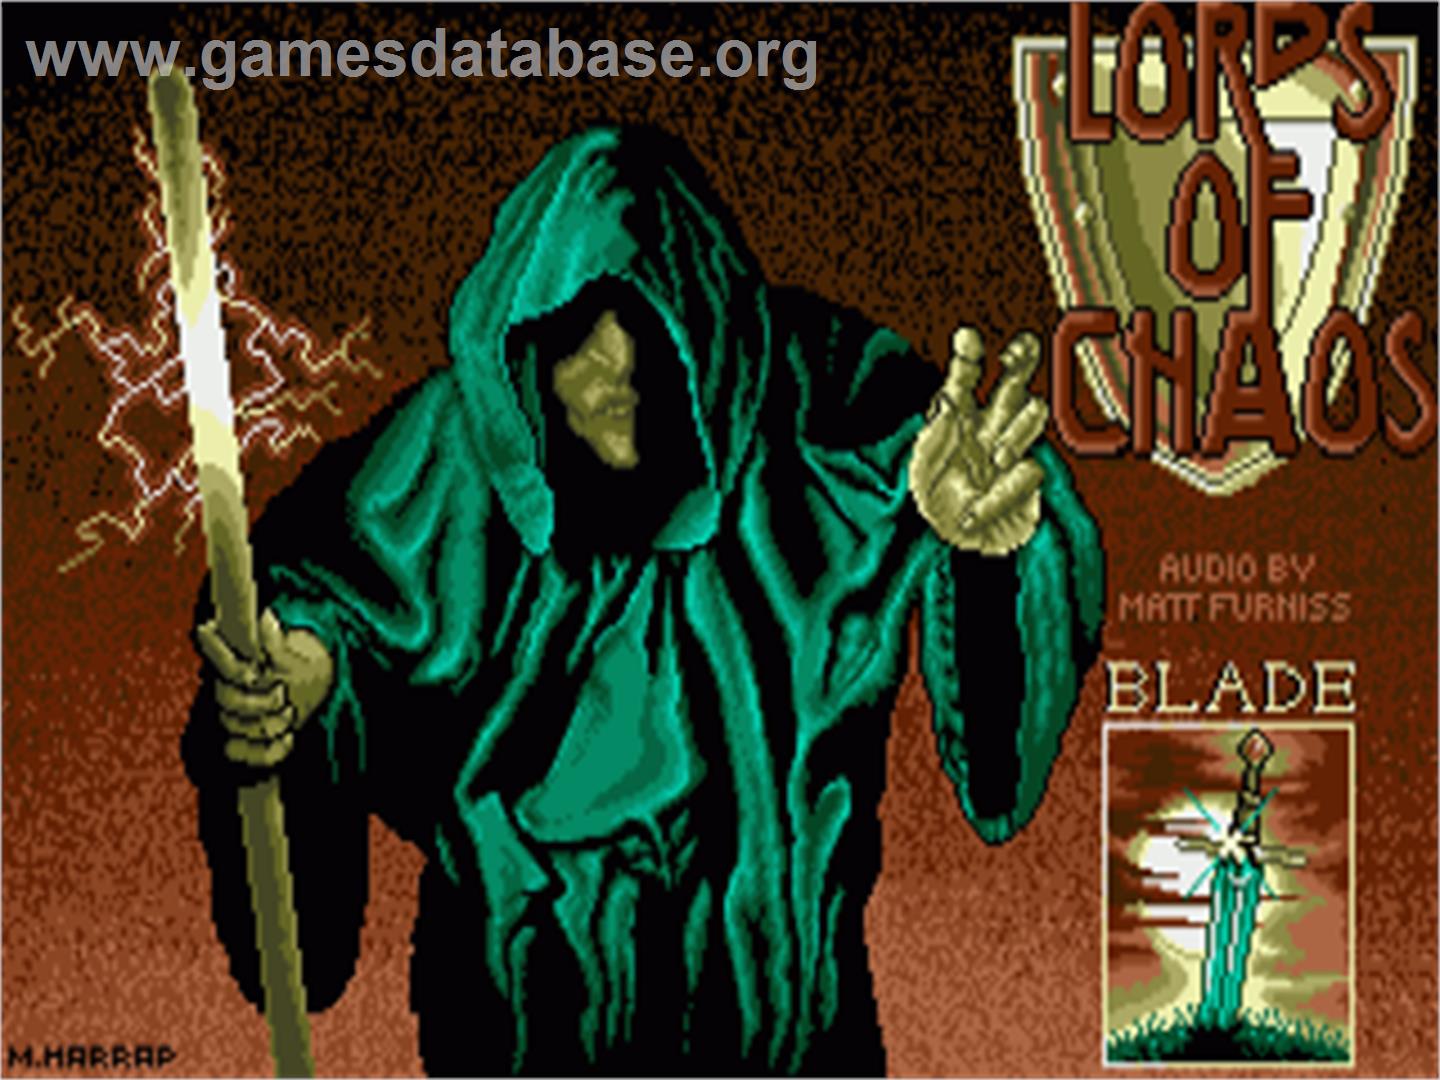 Lords of Chaos - Commodore Amiga - Artwork - In Game